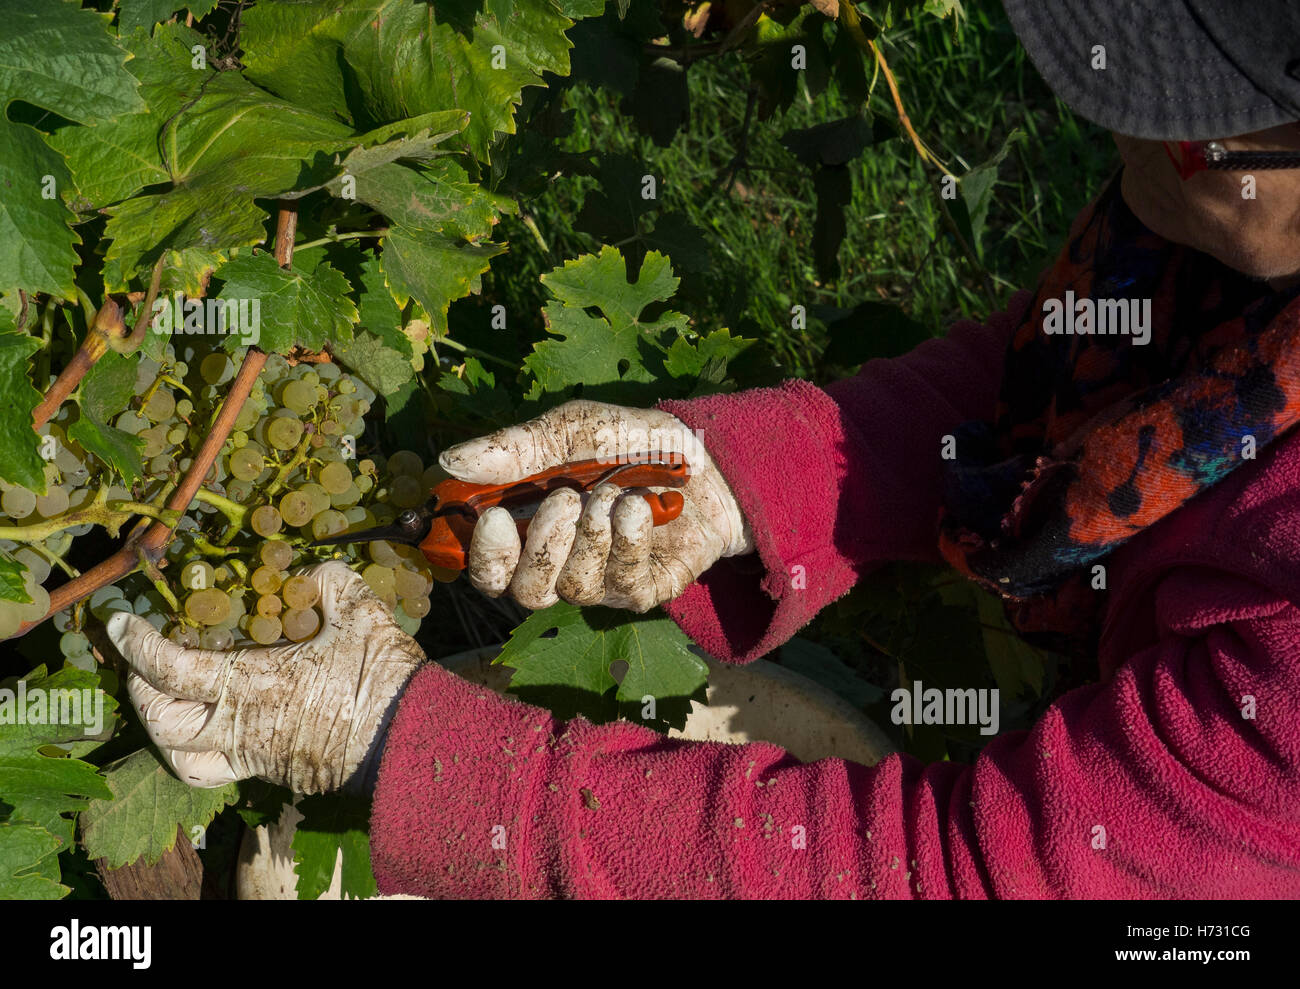 Manual harvesting. With the help of his pruning shears, the picker cuts a bunch of grapes. Stock Photo